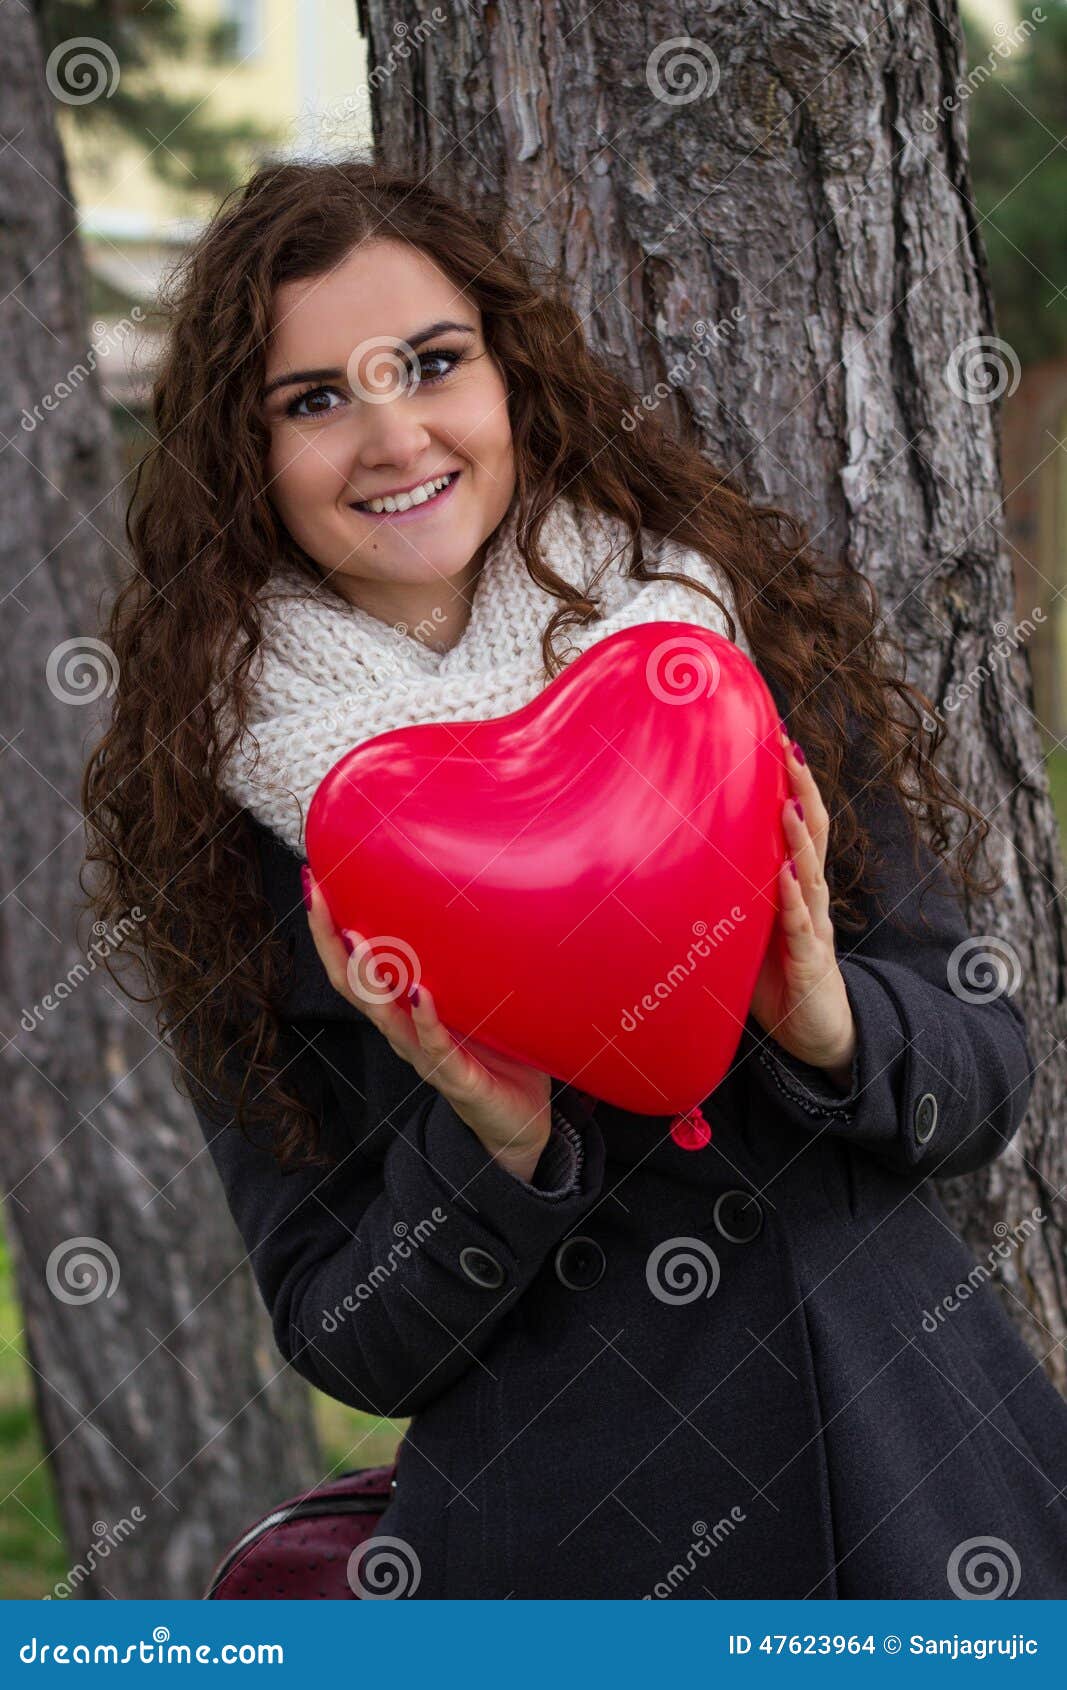 Smiling Girl Holding a Heart Stock Photo - Image of heart, girl: 47623964